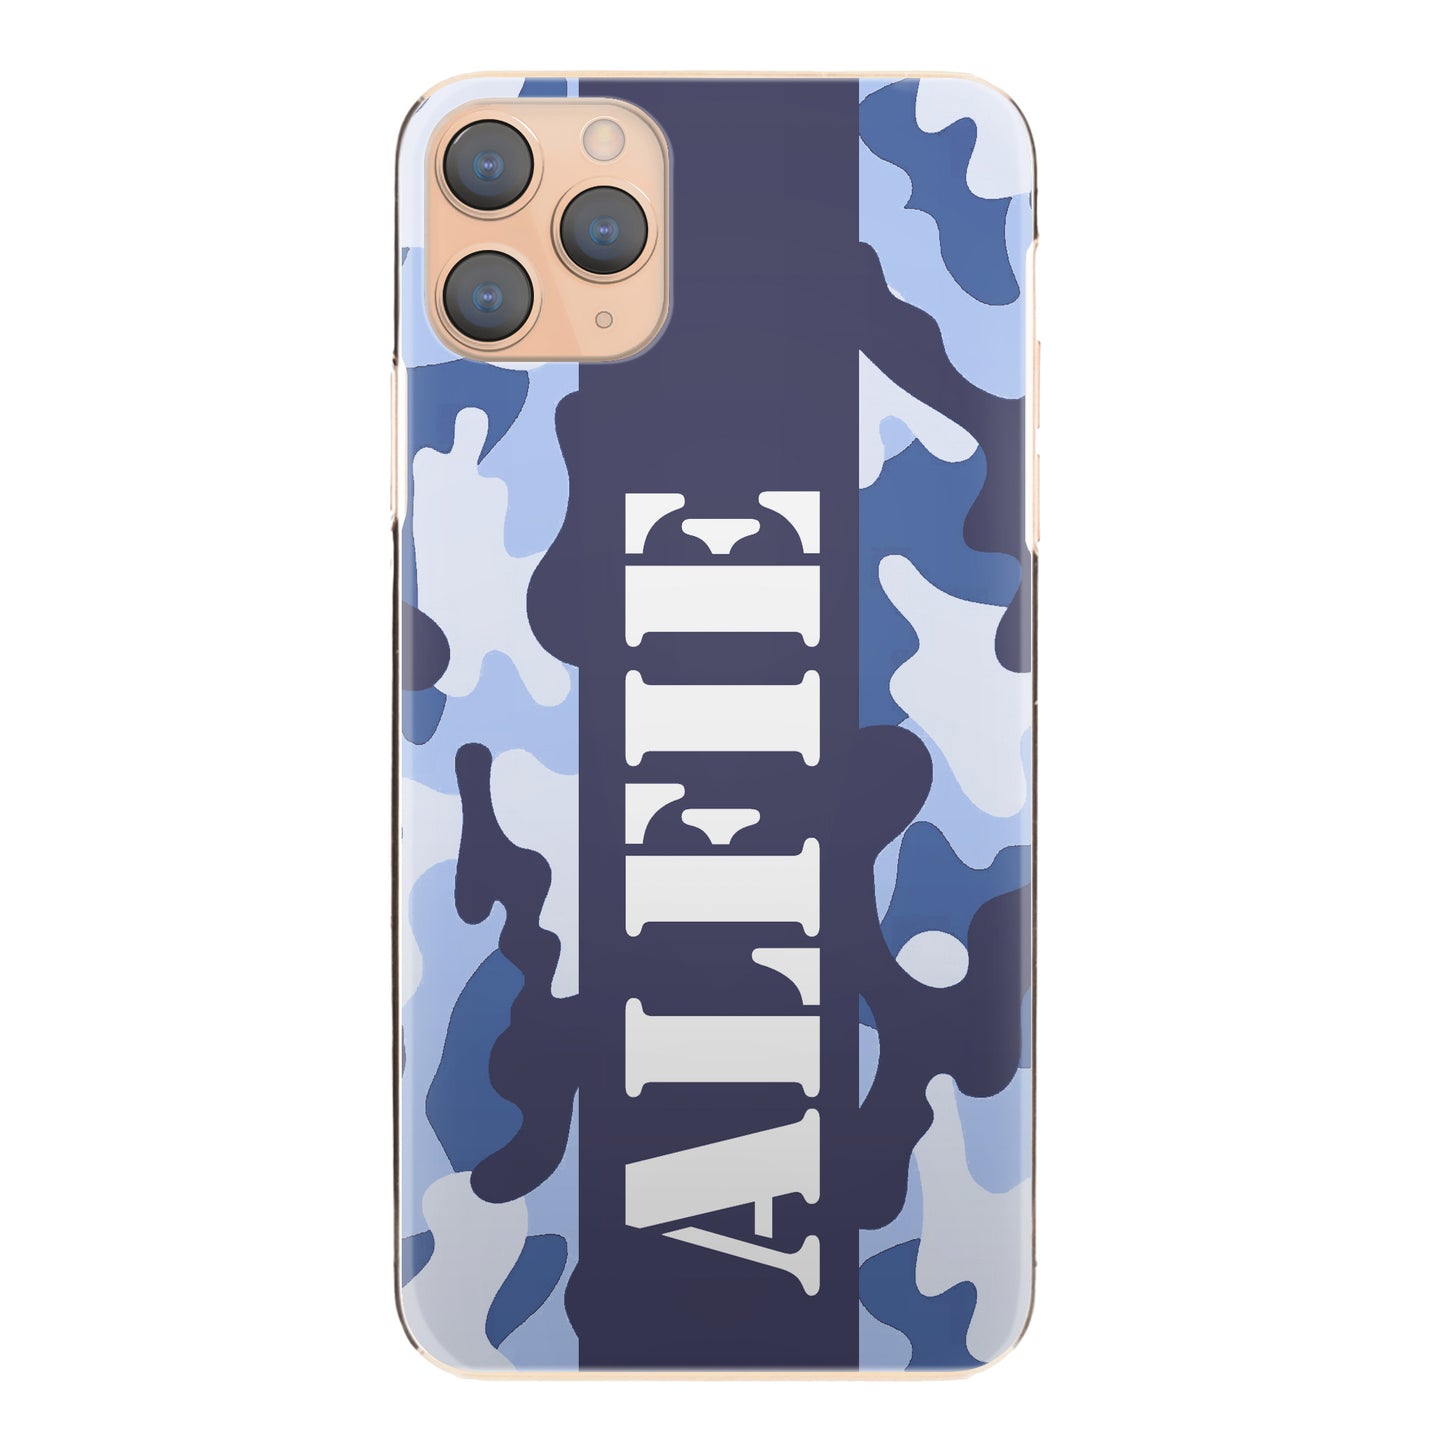 Personalised Xiaomi Phone Hard Case with Military Text on Blue Camo